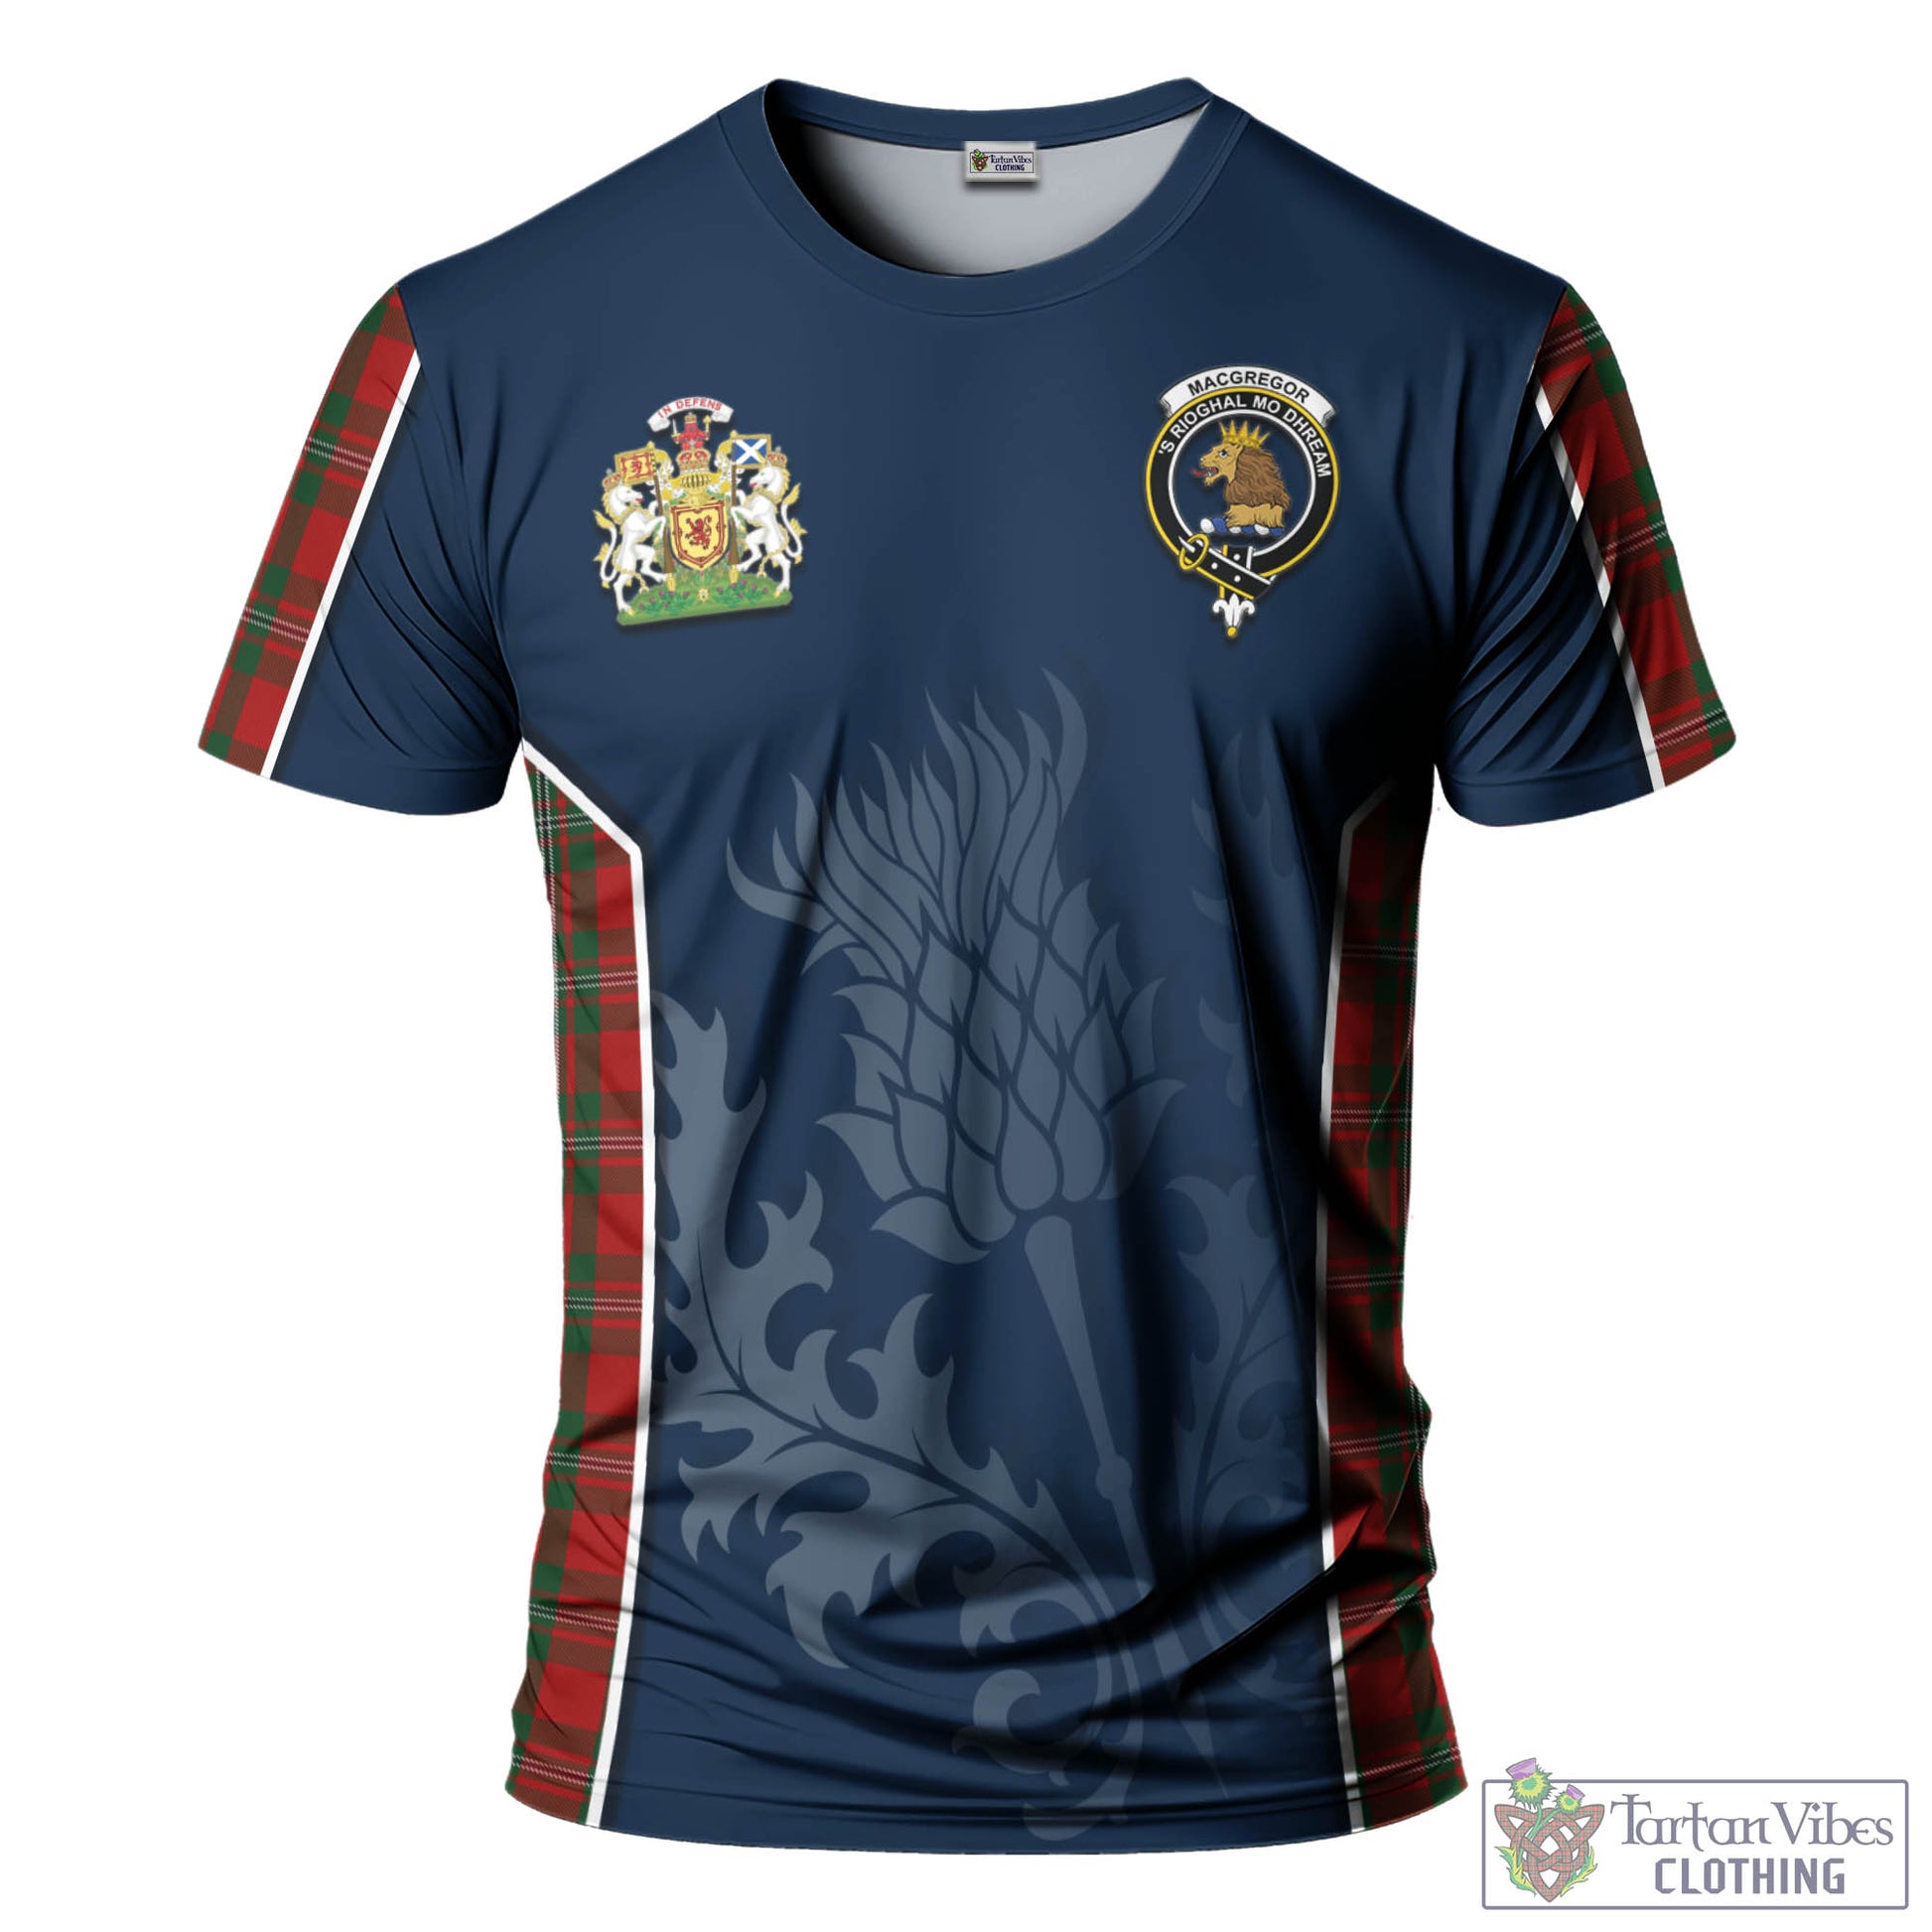 Tartan Vibes Clothing MacGregor Tartan T-Shirt with Family Crest and Scottish Thistle Vibes Sport Style